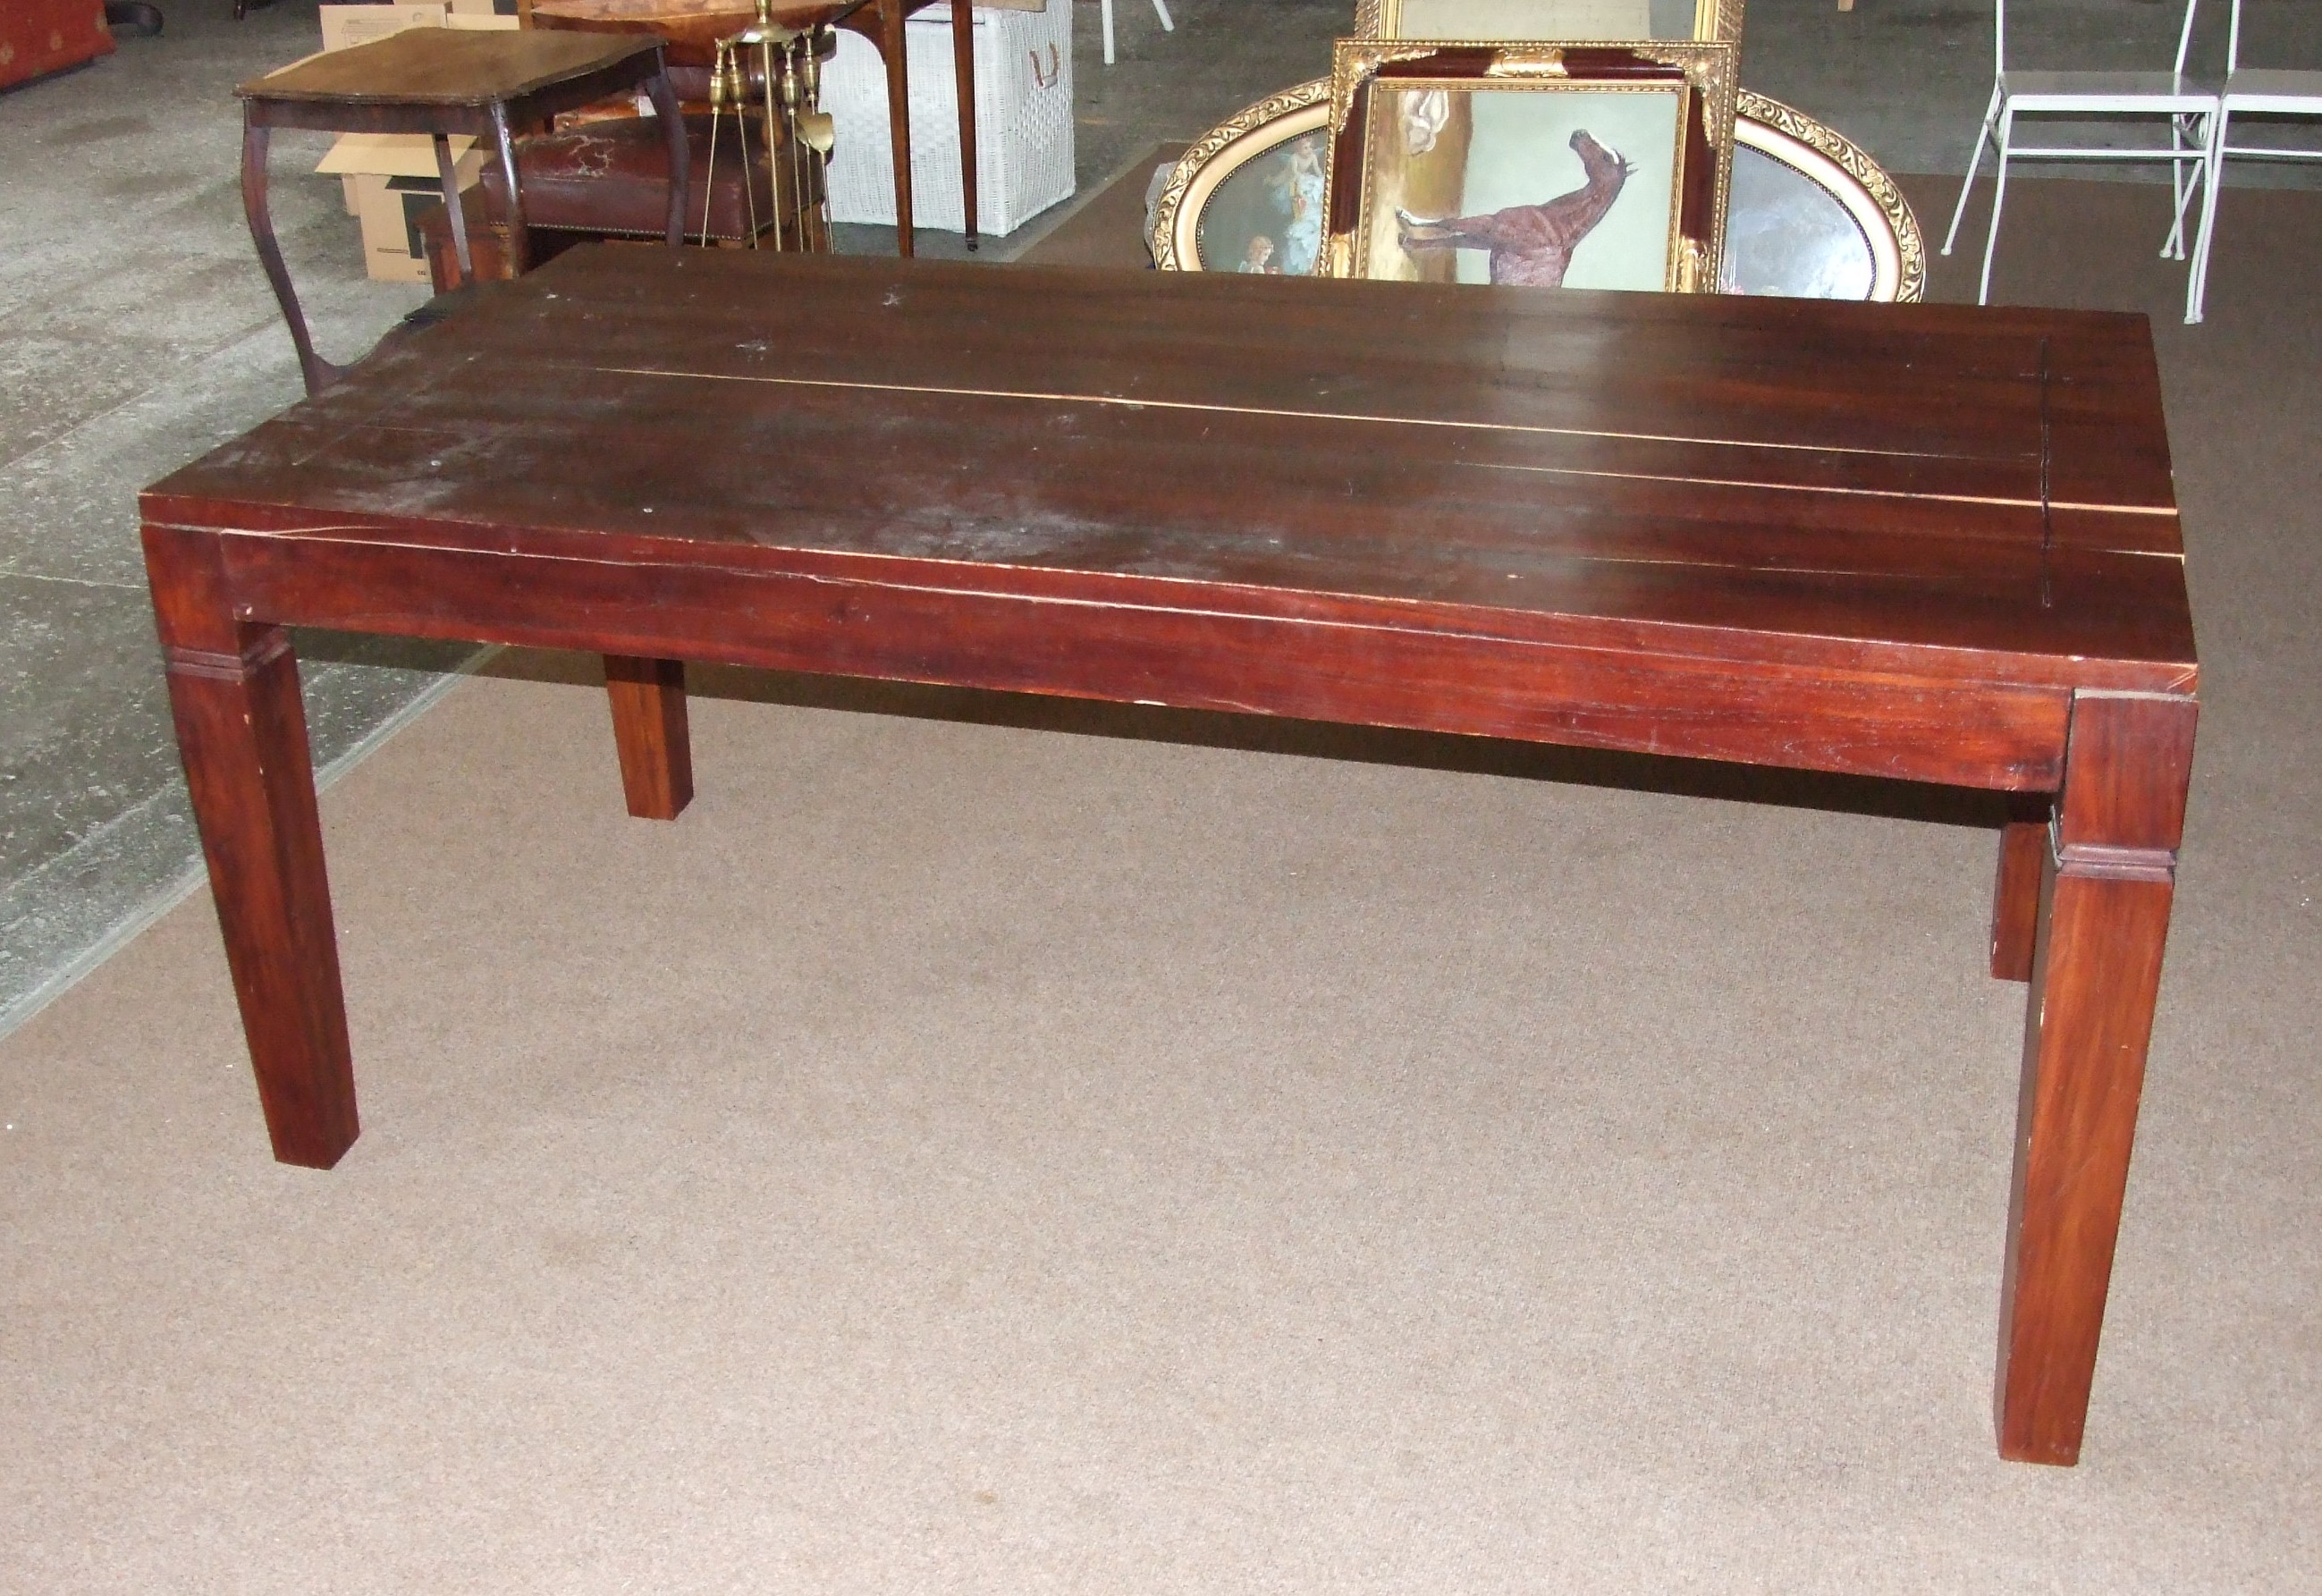 Mahogany Stained Oblong Table (71” x 35”).